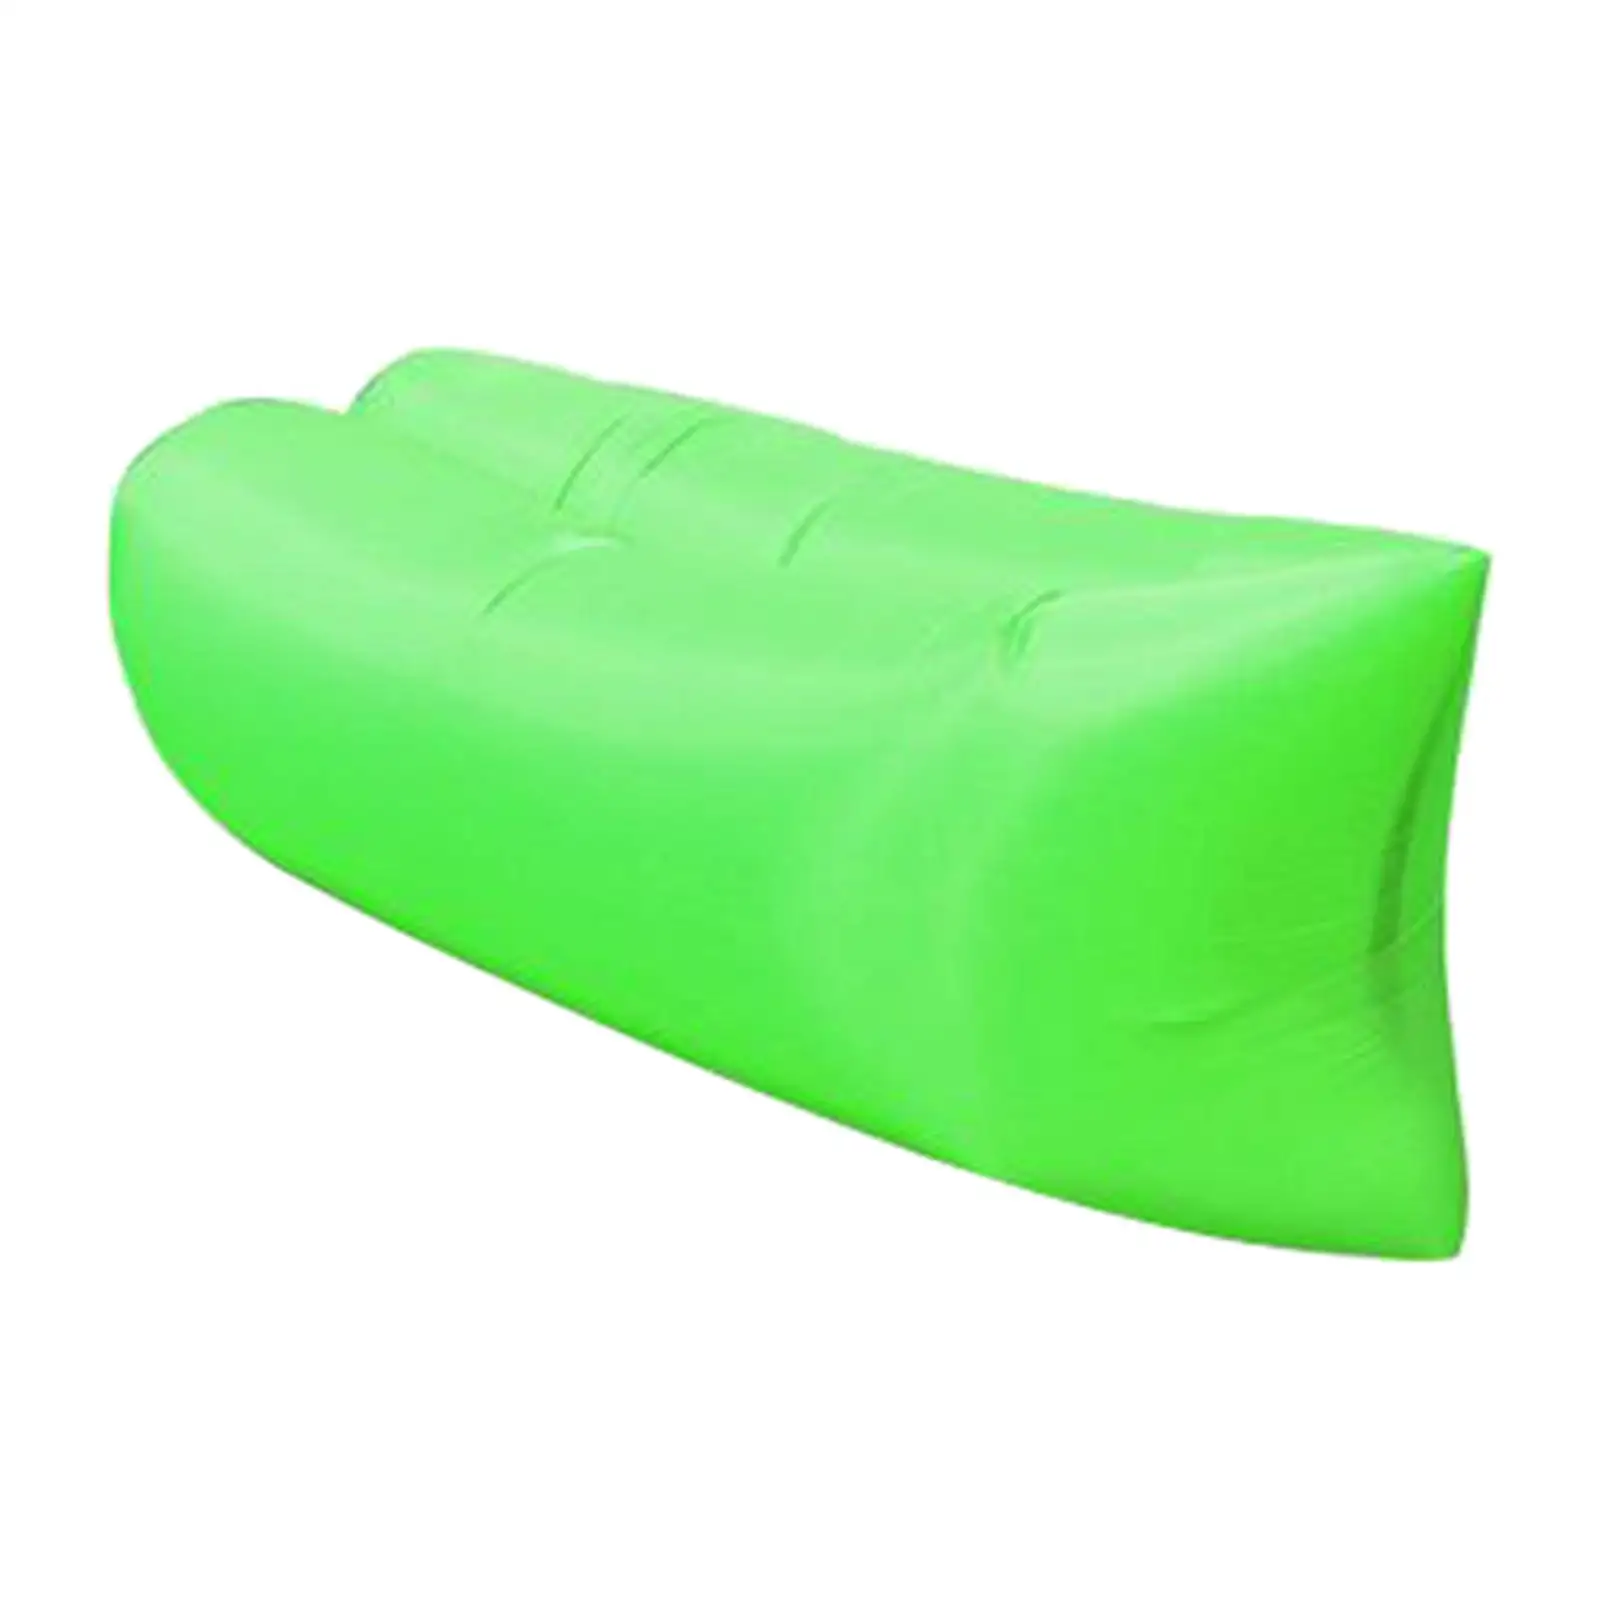 Air Bed Sofa Inflatable Camping Couch Lounger Waterproof Sleeping Bag for Pool